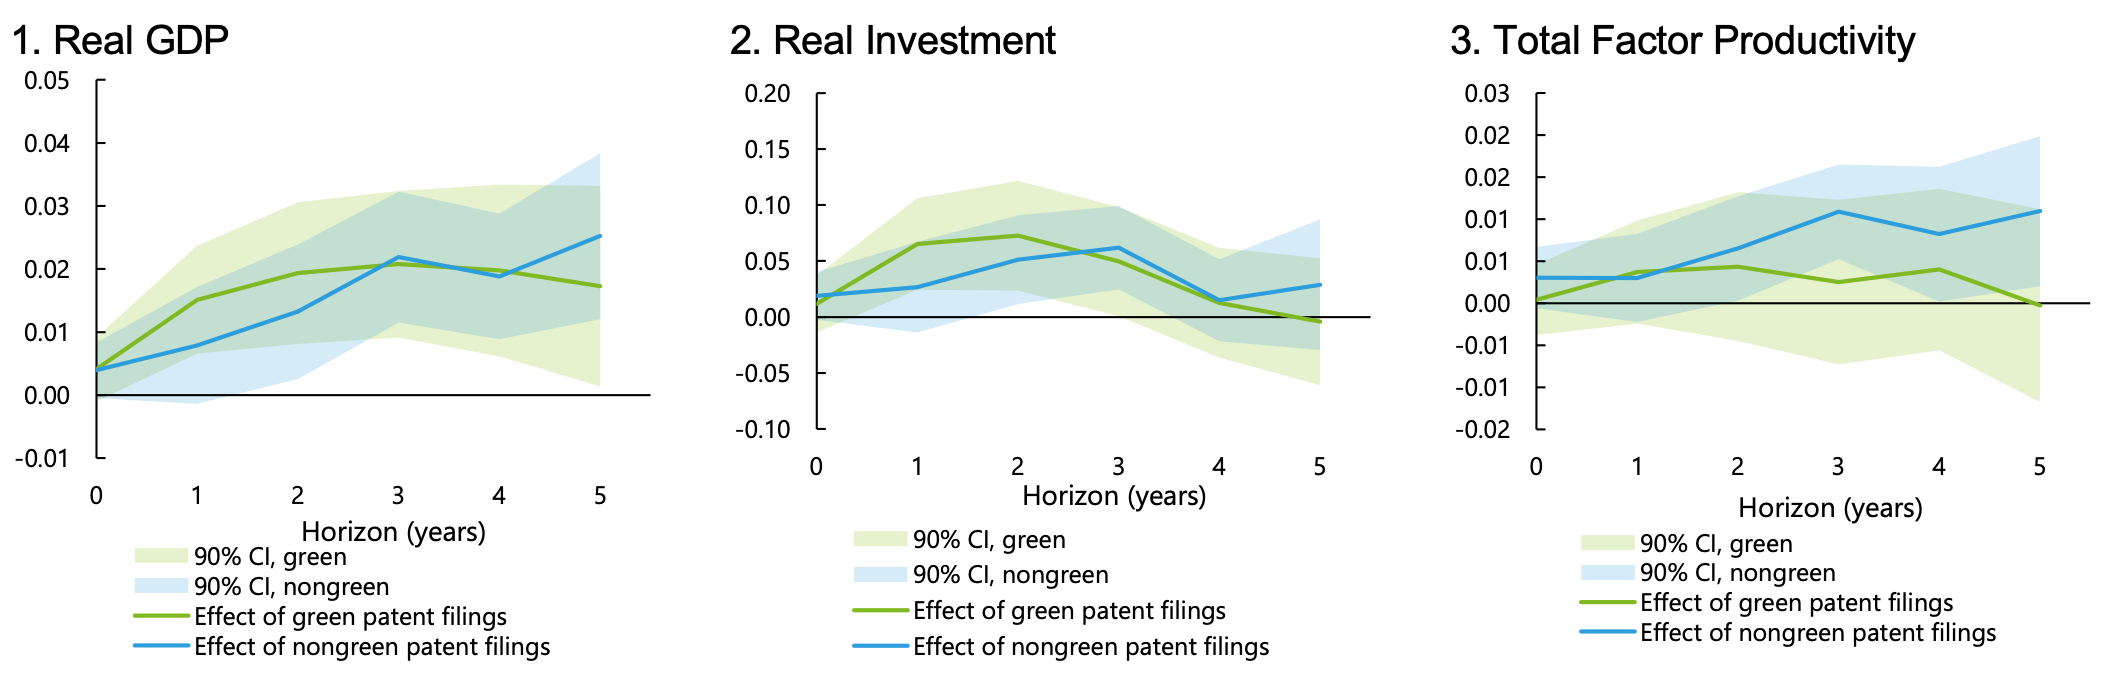 Figure 1 Gauging the impact of green and nongreen patent filings on economic activity